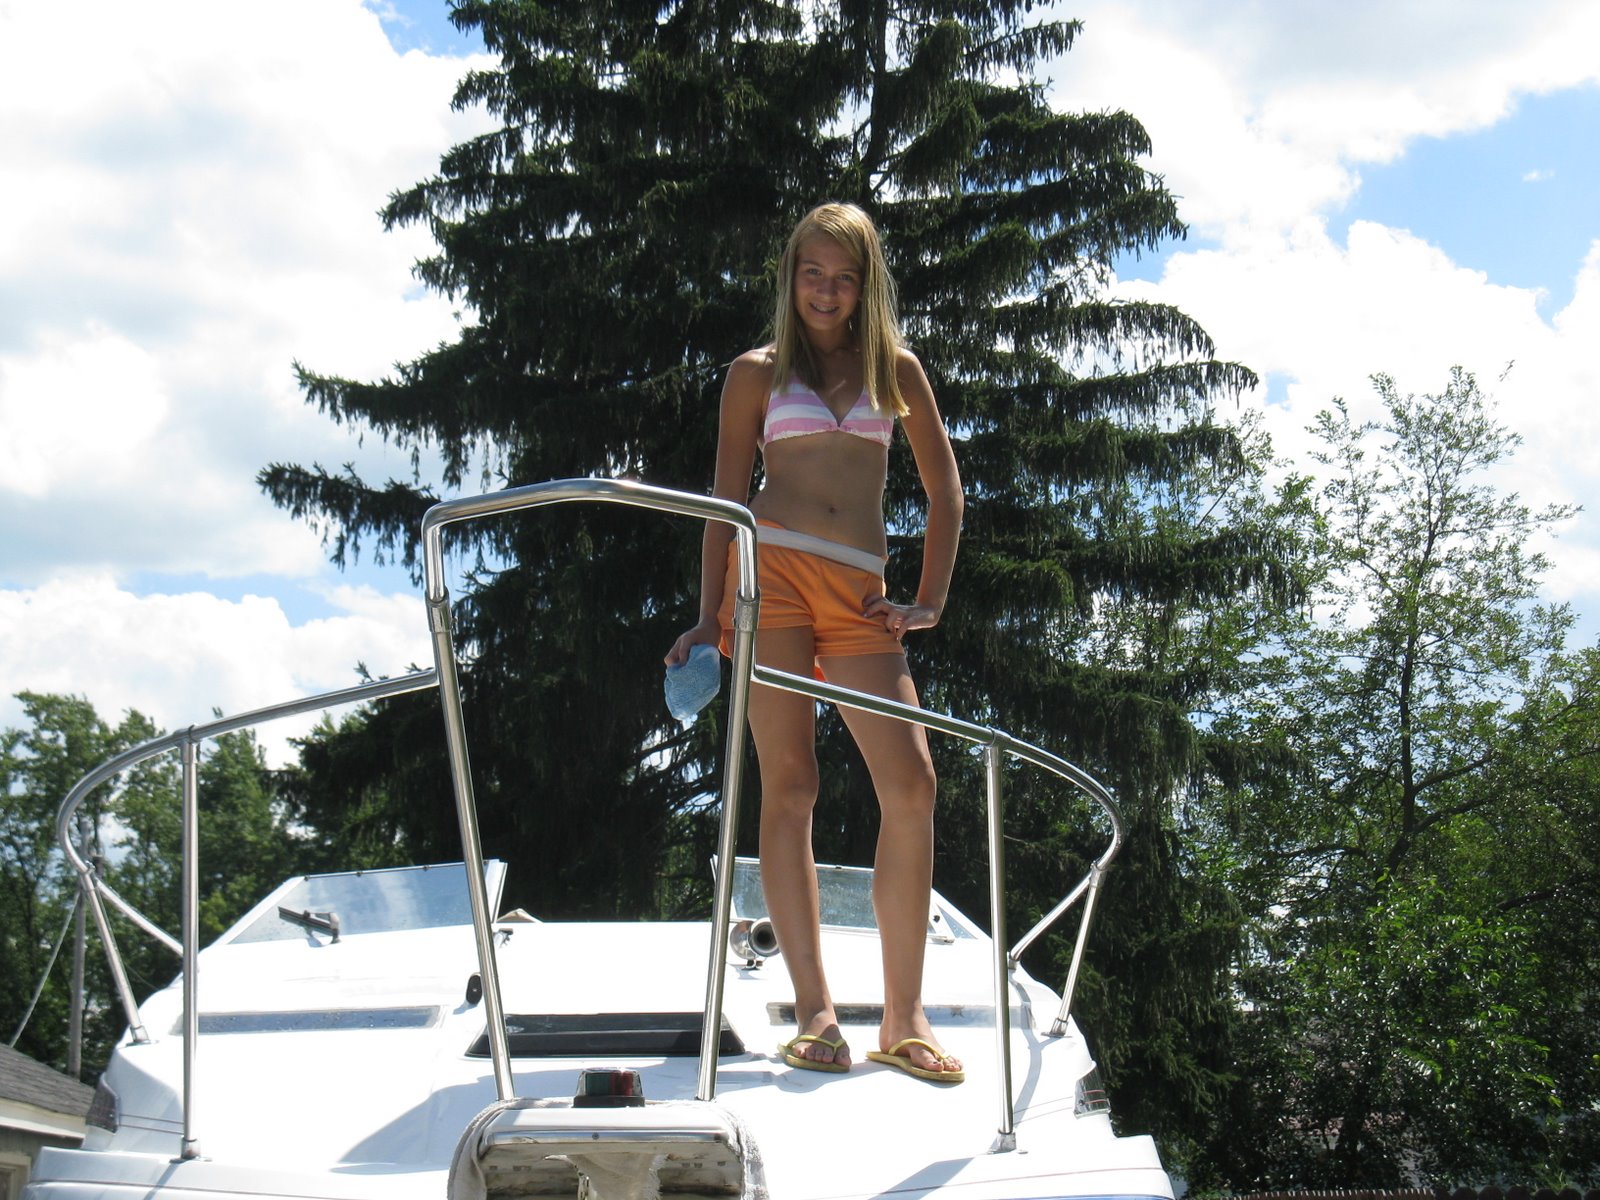 [aubs+cleaning+boat+002.JPG]